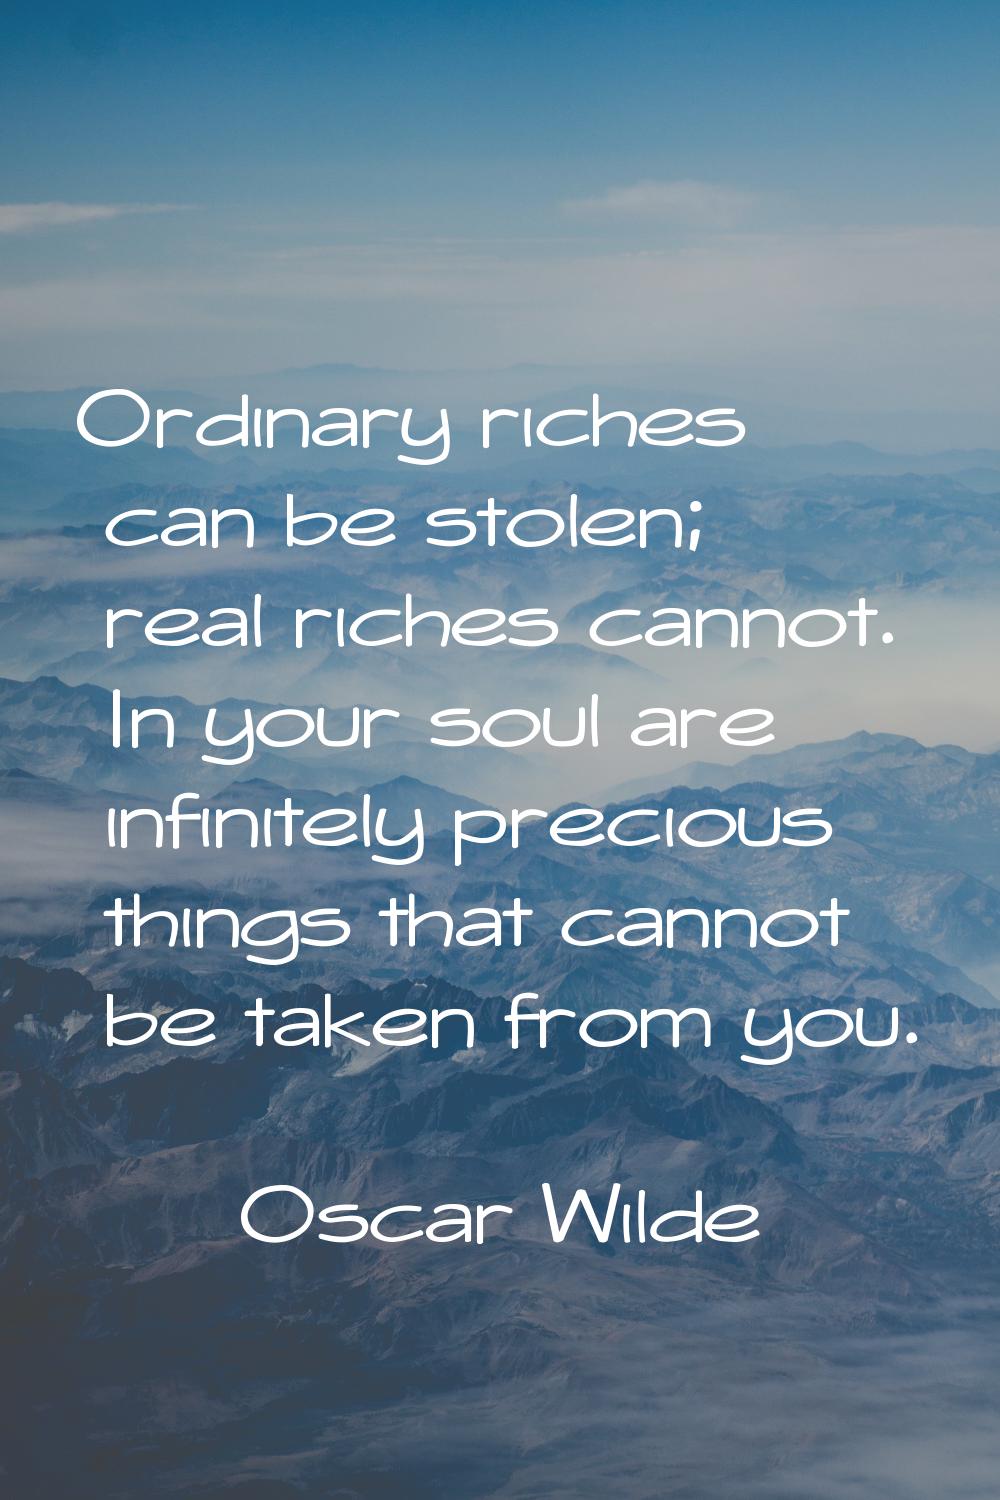 Ordinary riches can be stolen; real riches cannot. In your soul are infinitely precious things that